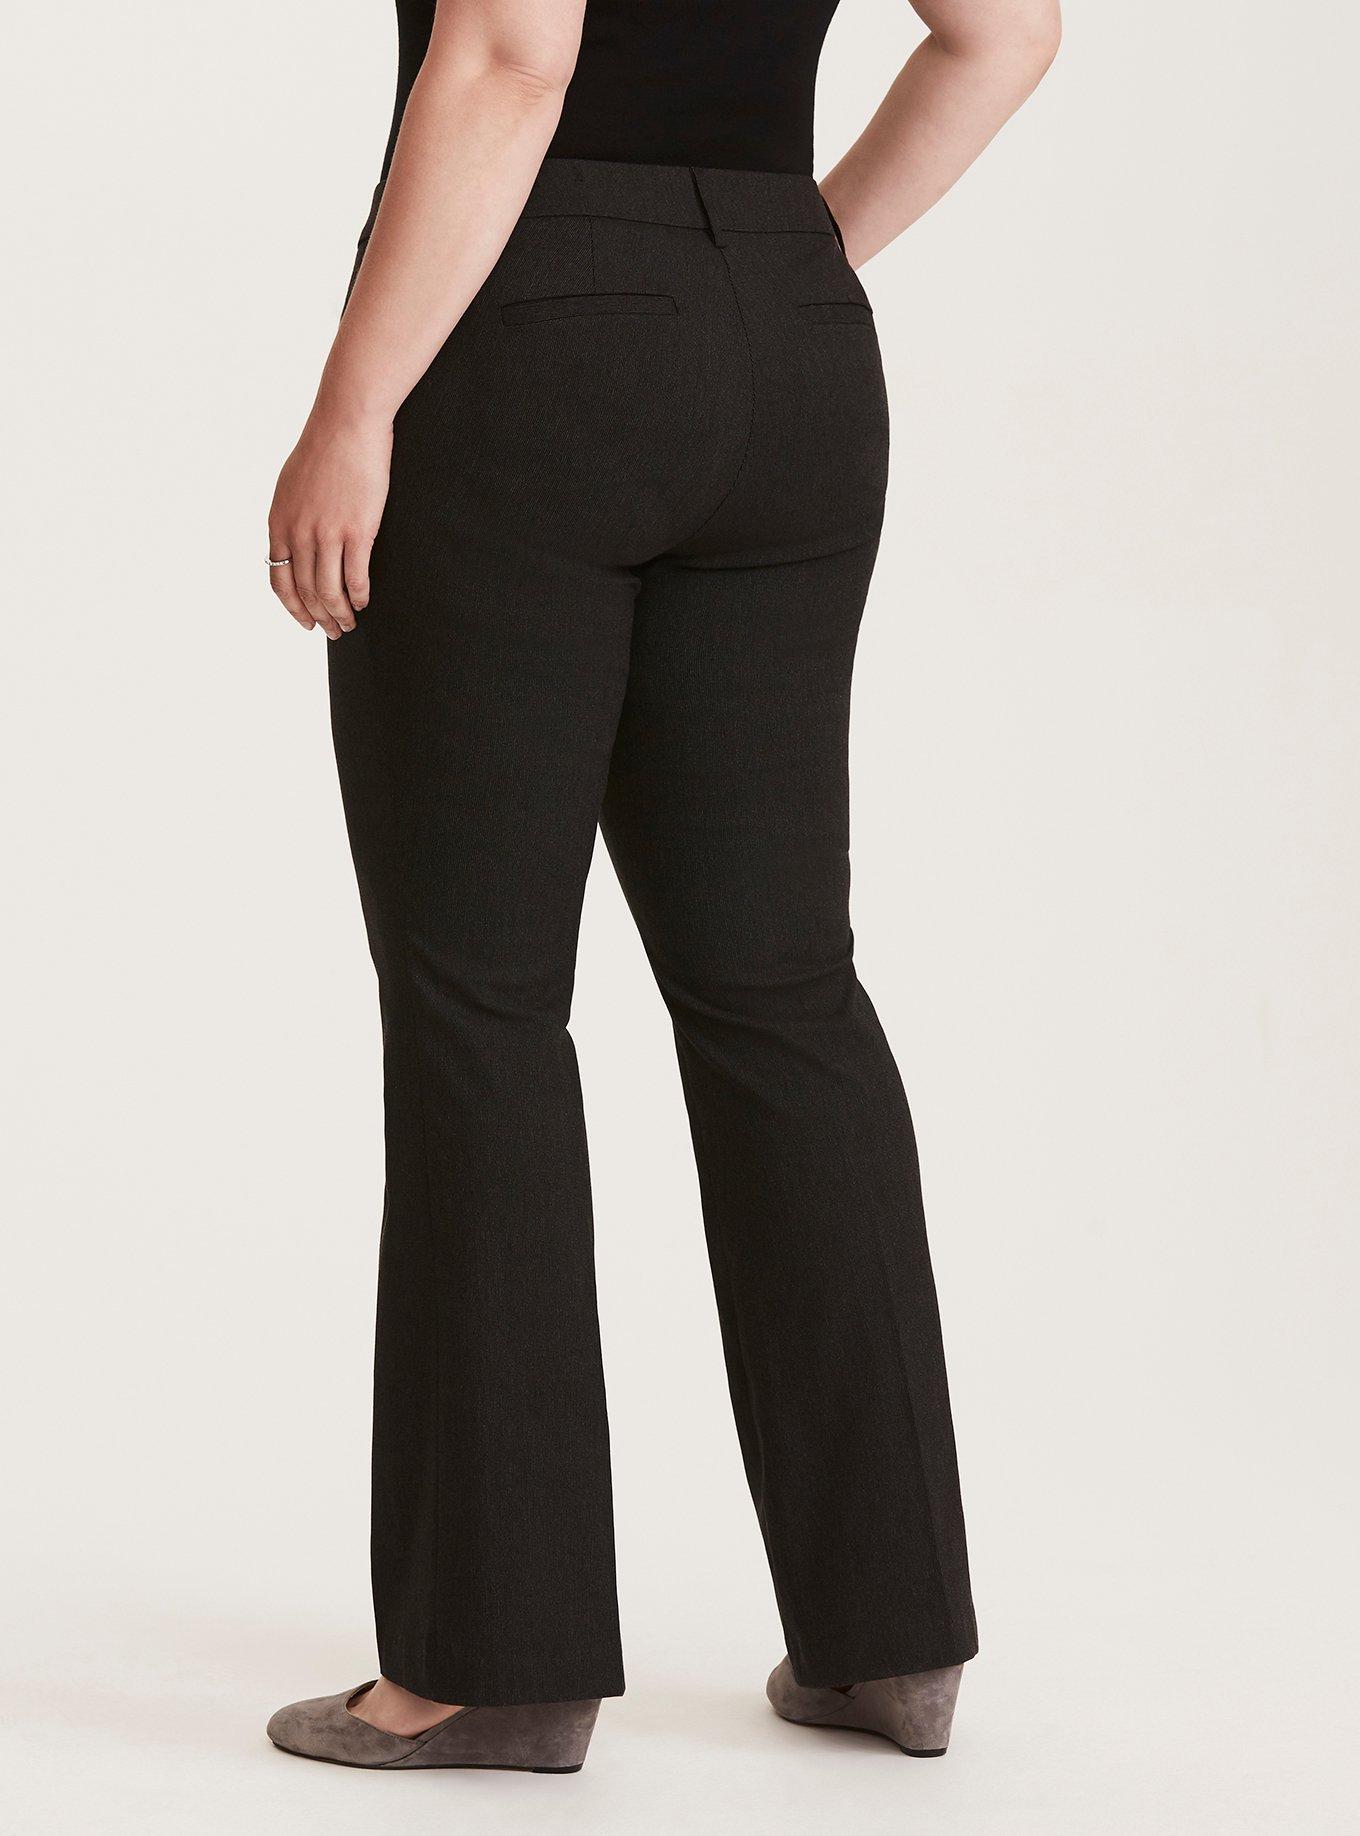 Plus Size - Slim Flare Pant - Grey Deluxe Stretch - Torrid